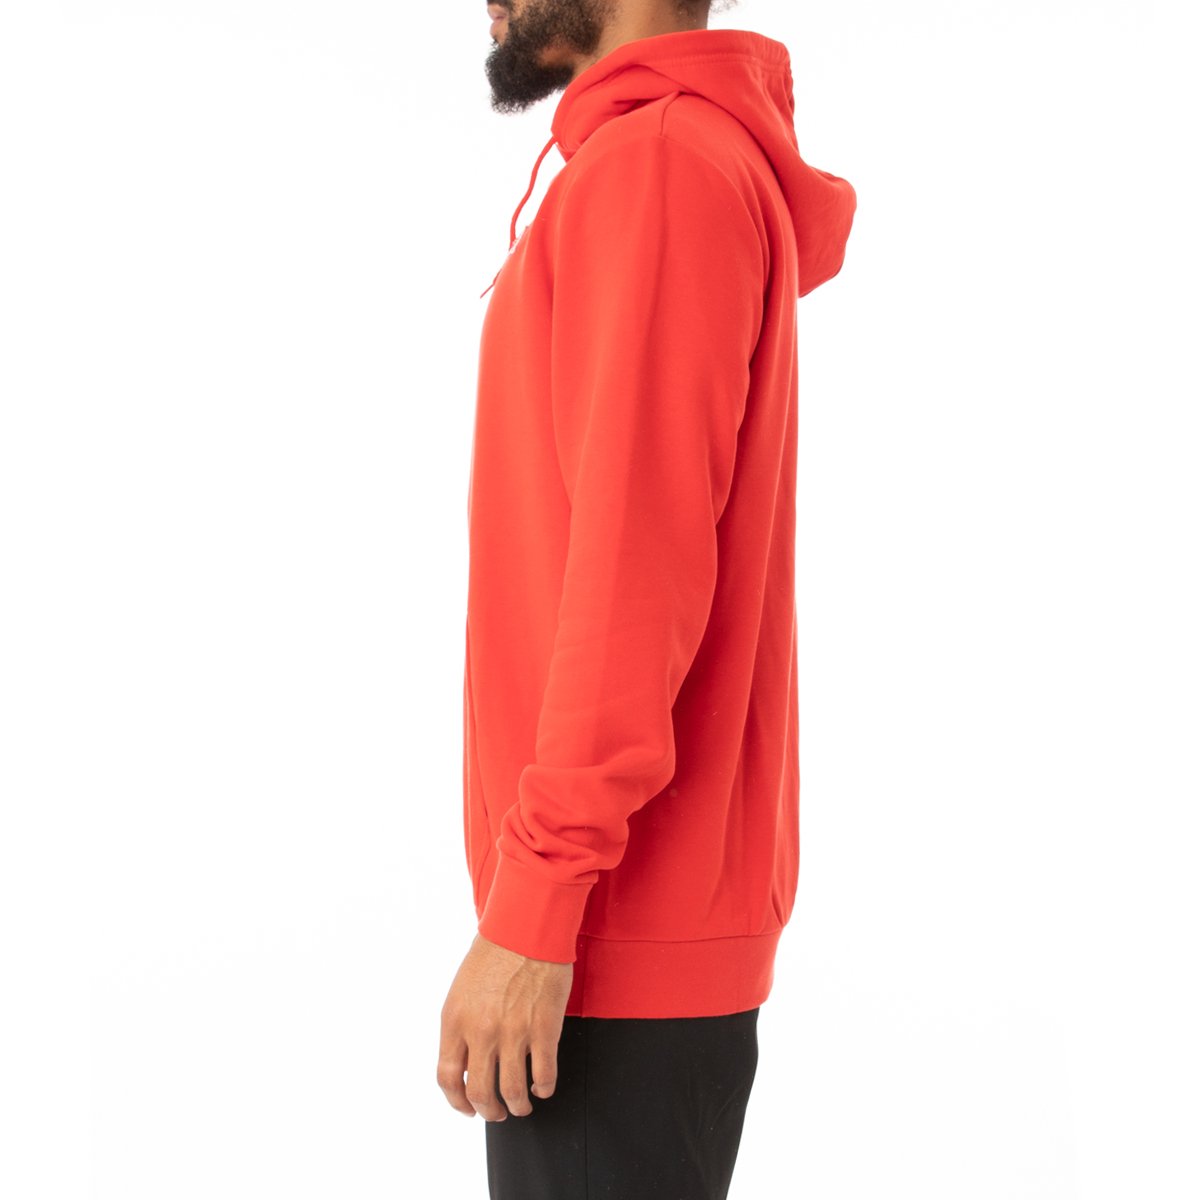 KAPPA LOGO CAIOK SWEATER-Red MD Coral